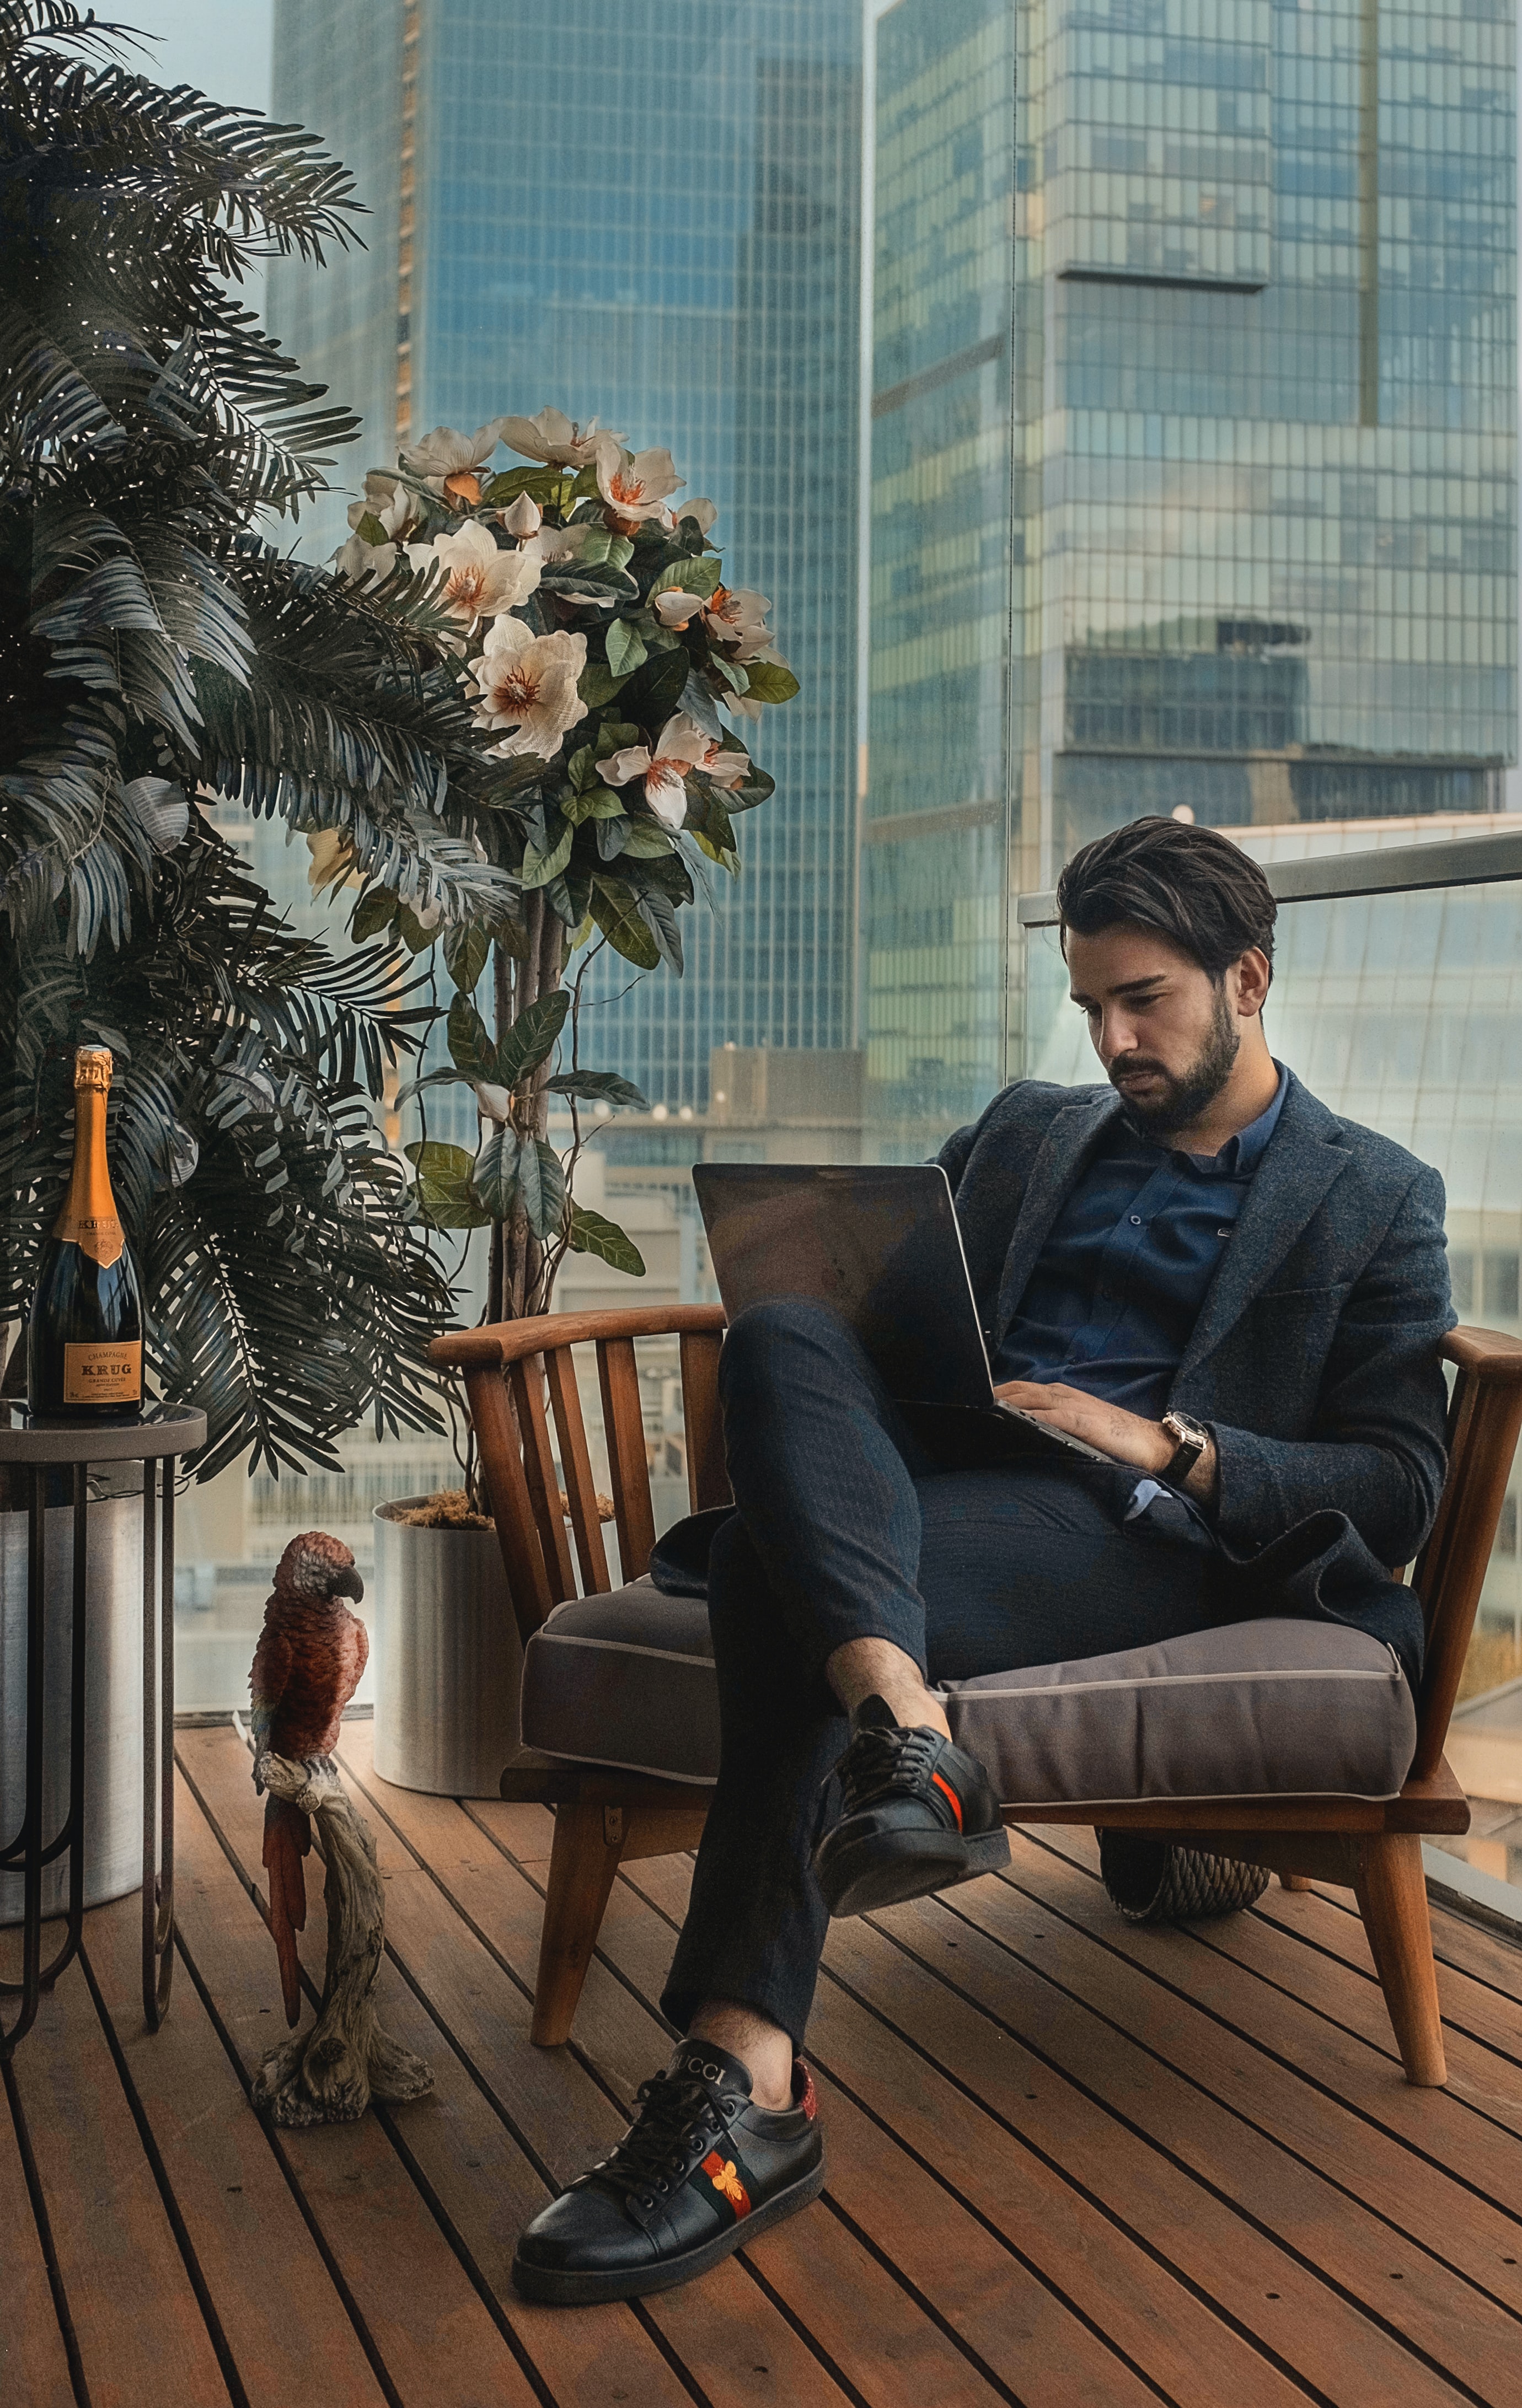 Rich guy on laptop in a penthouse with parrot and Krug champagne